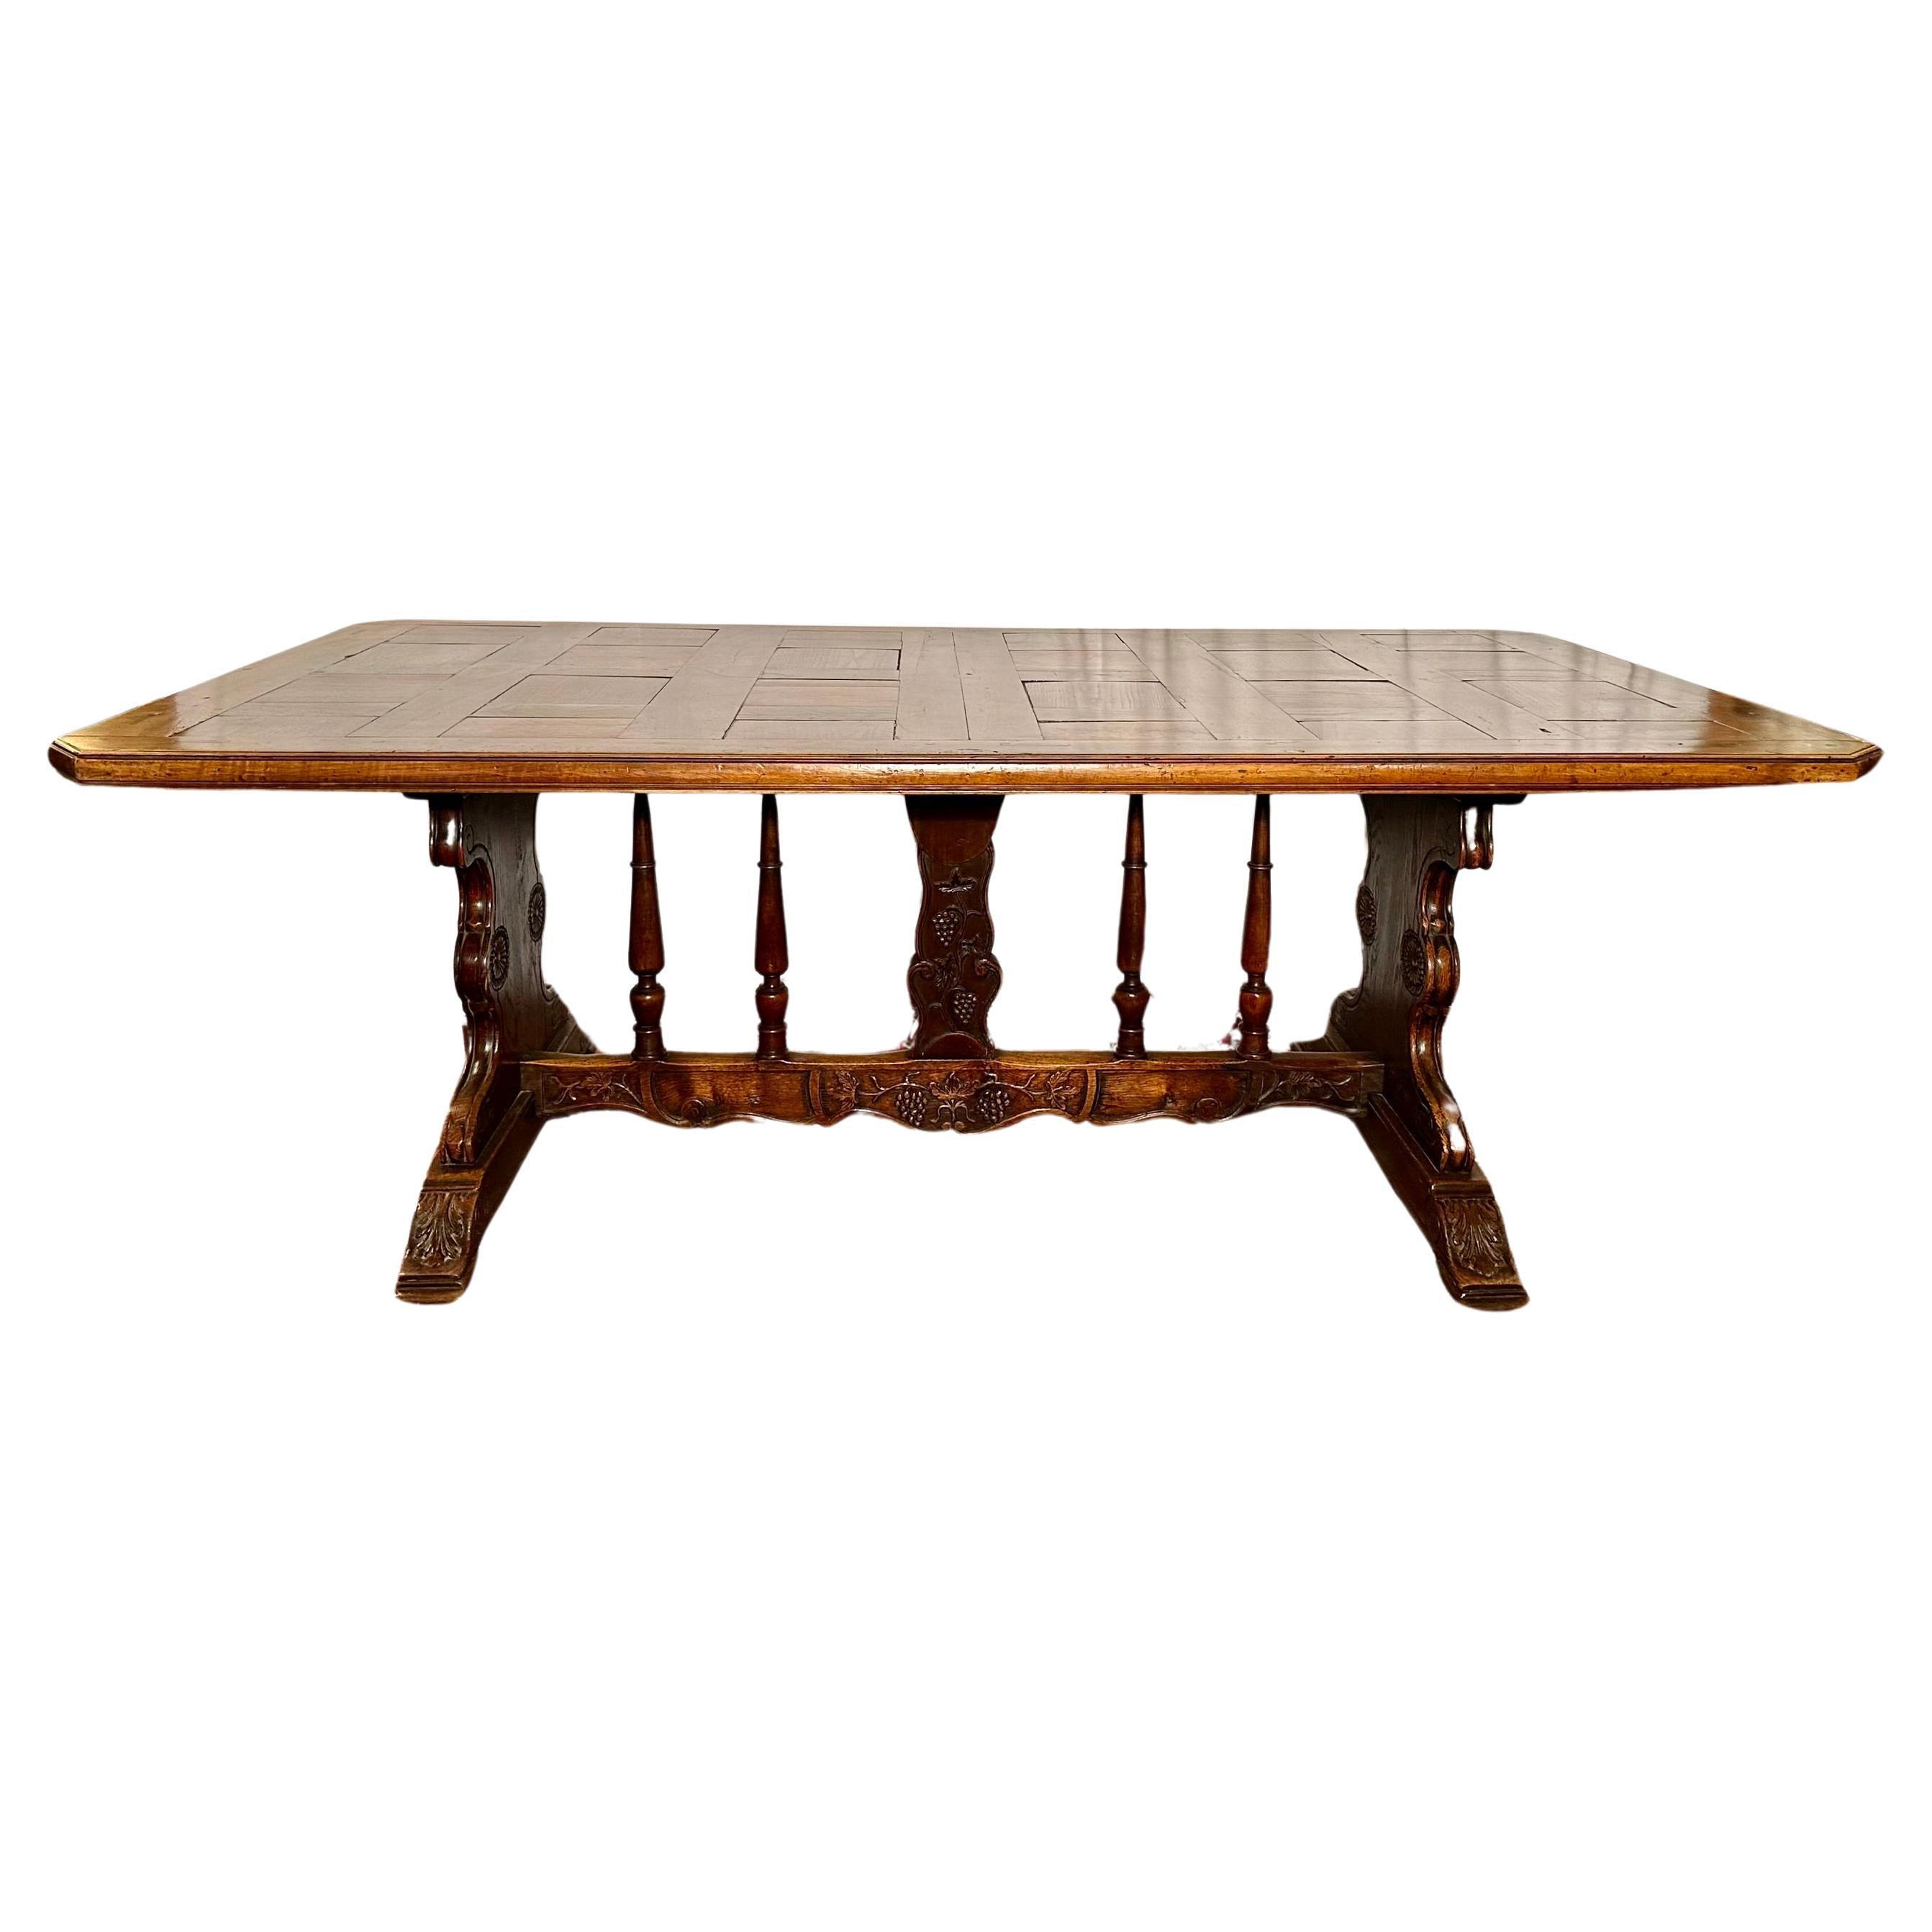 Antique French Oak and Walnut Parquetry Vineyard Table, Circa 1860. For Sale